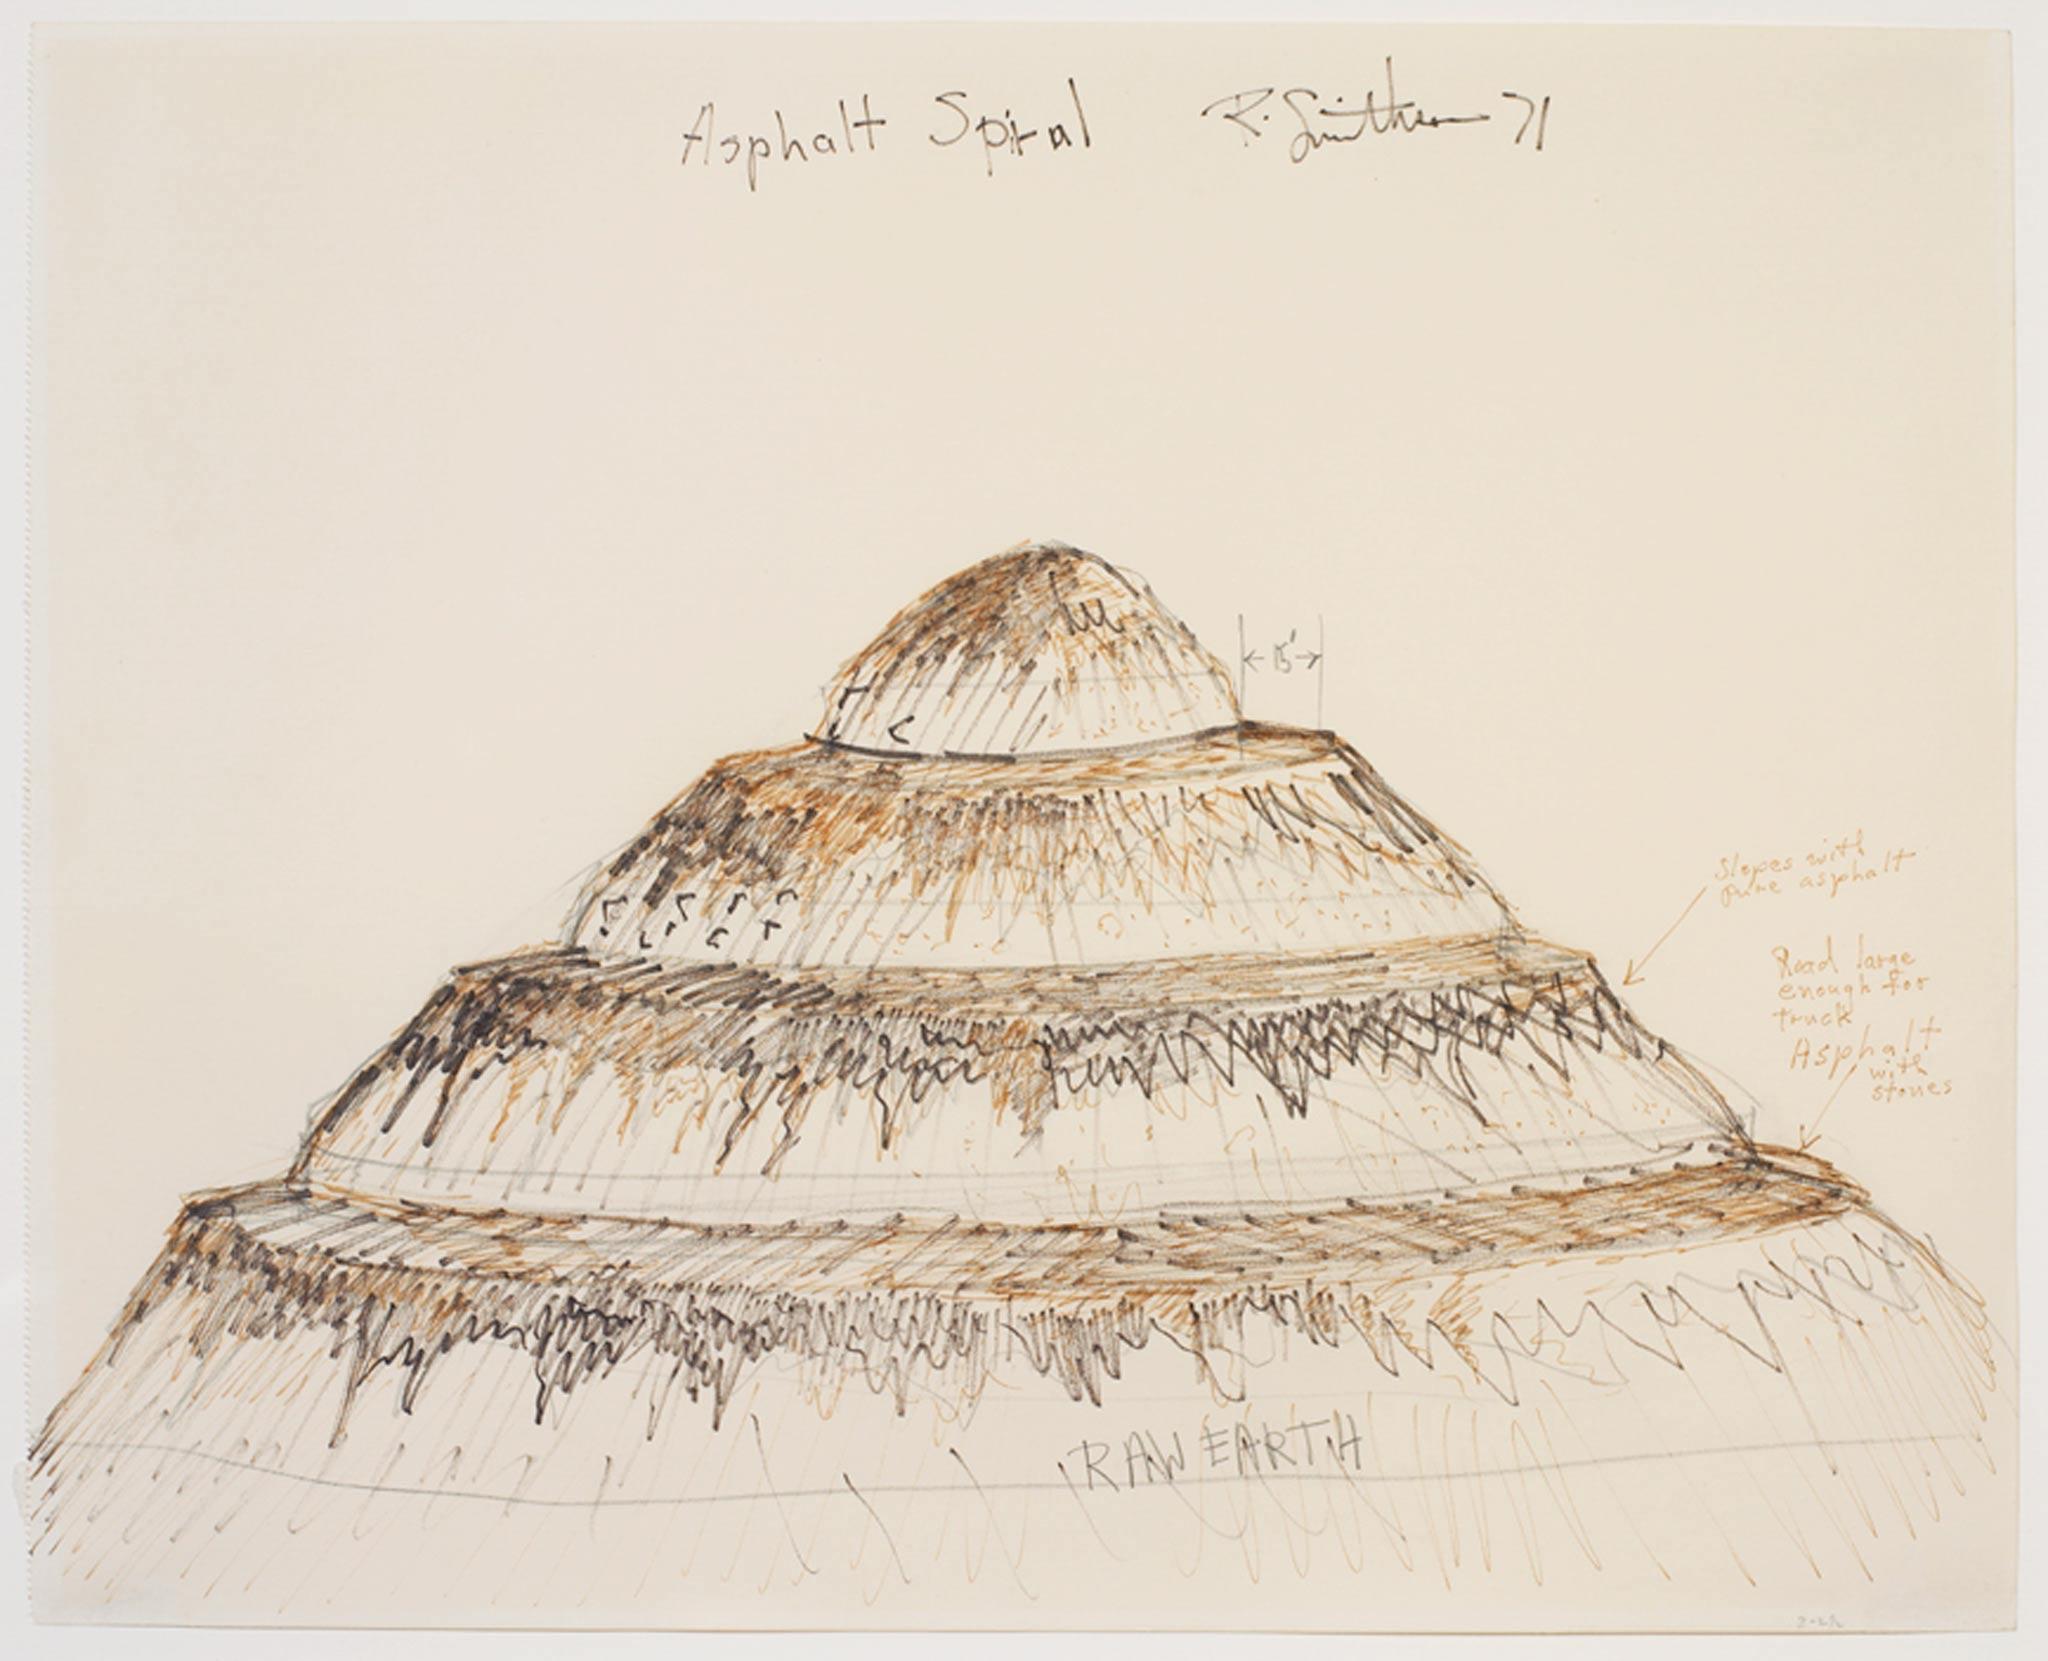 a drawing of a spiraling hill with asphalt on the pathways circling the hill. Handwritten notations